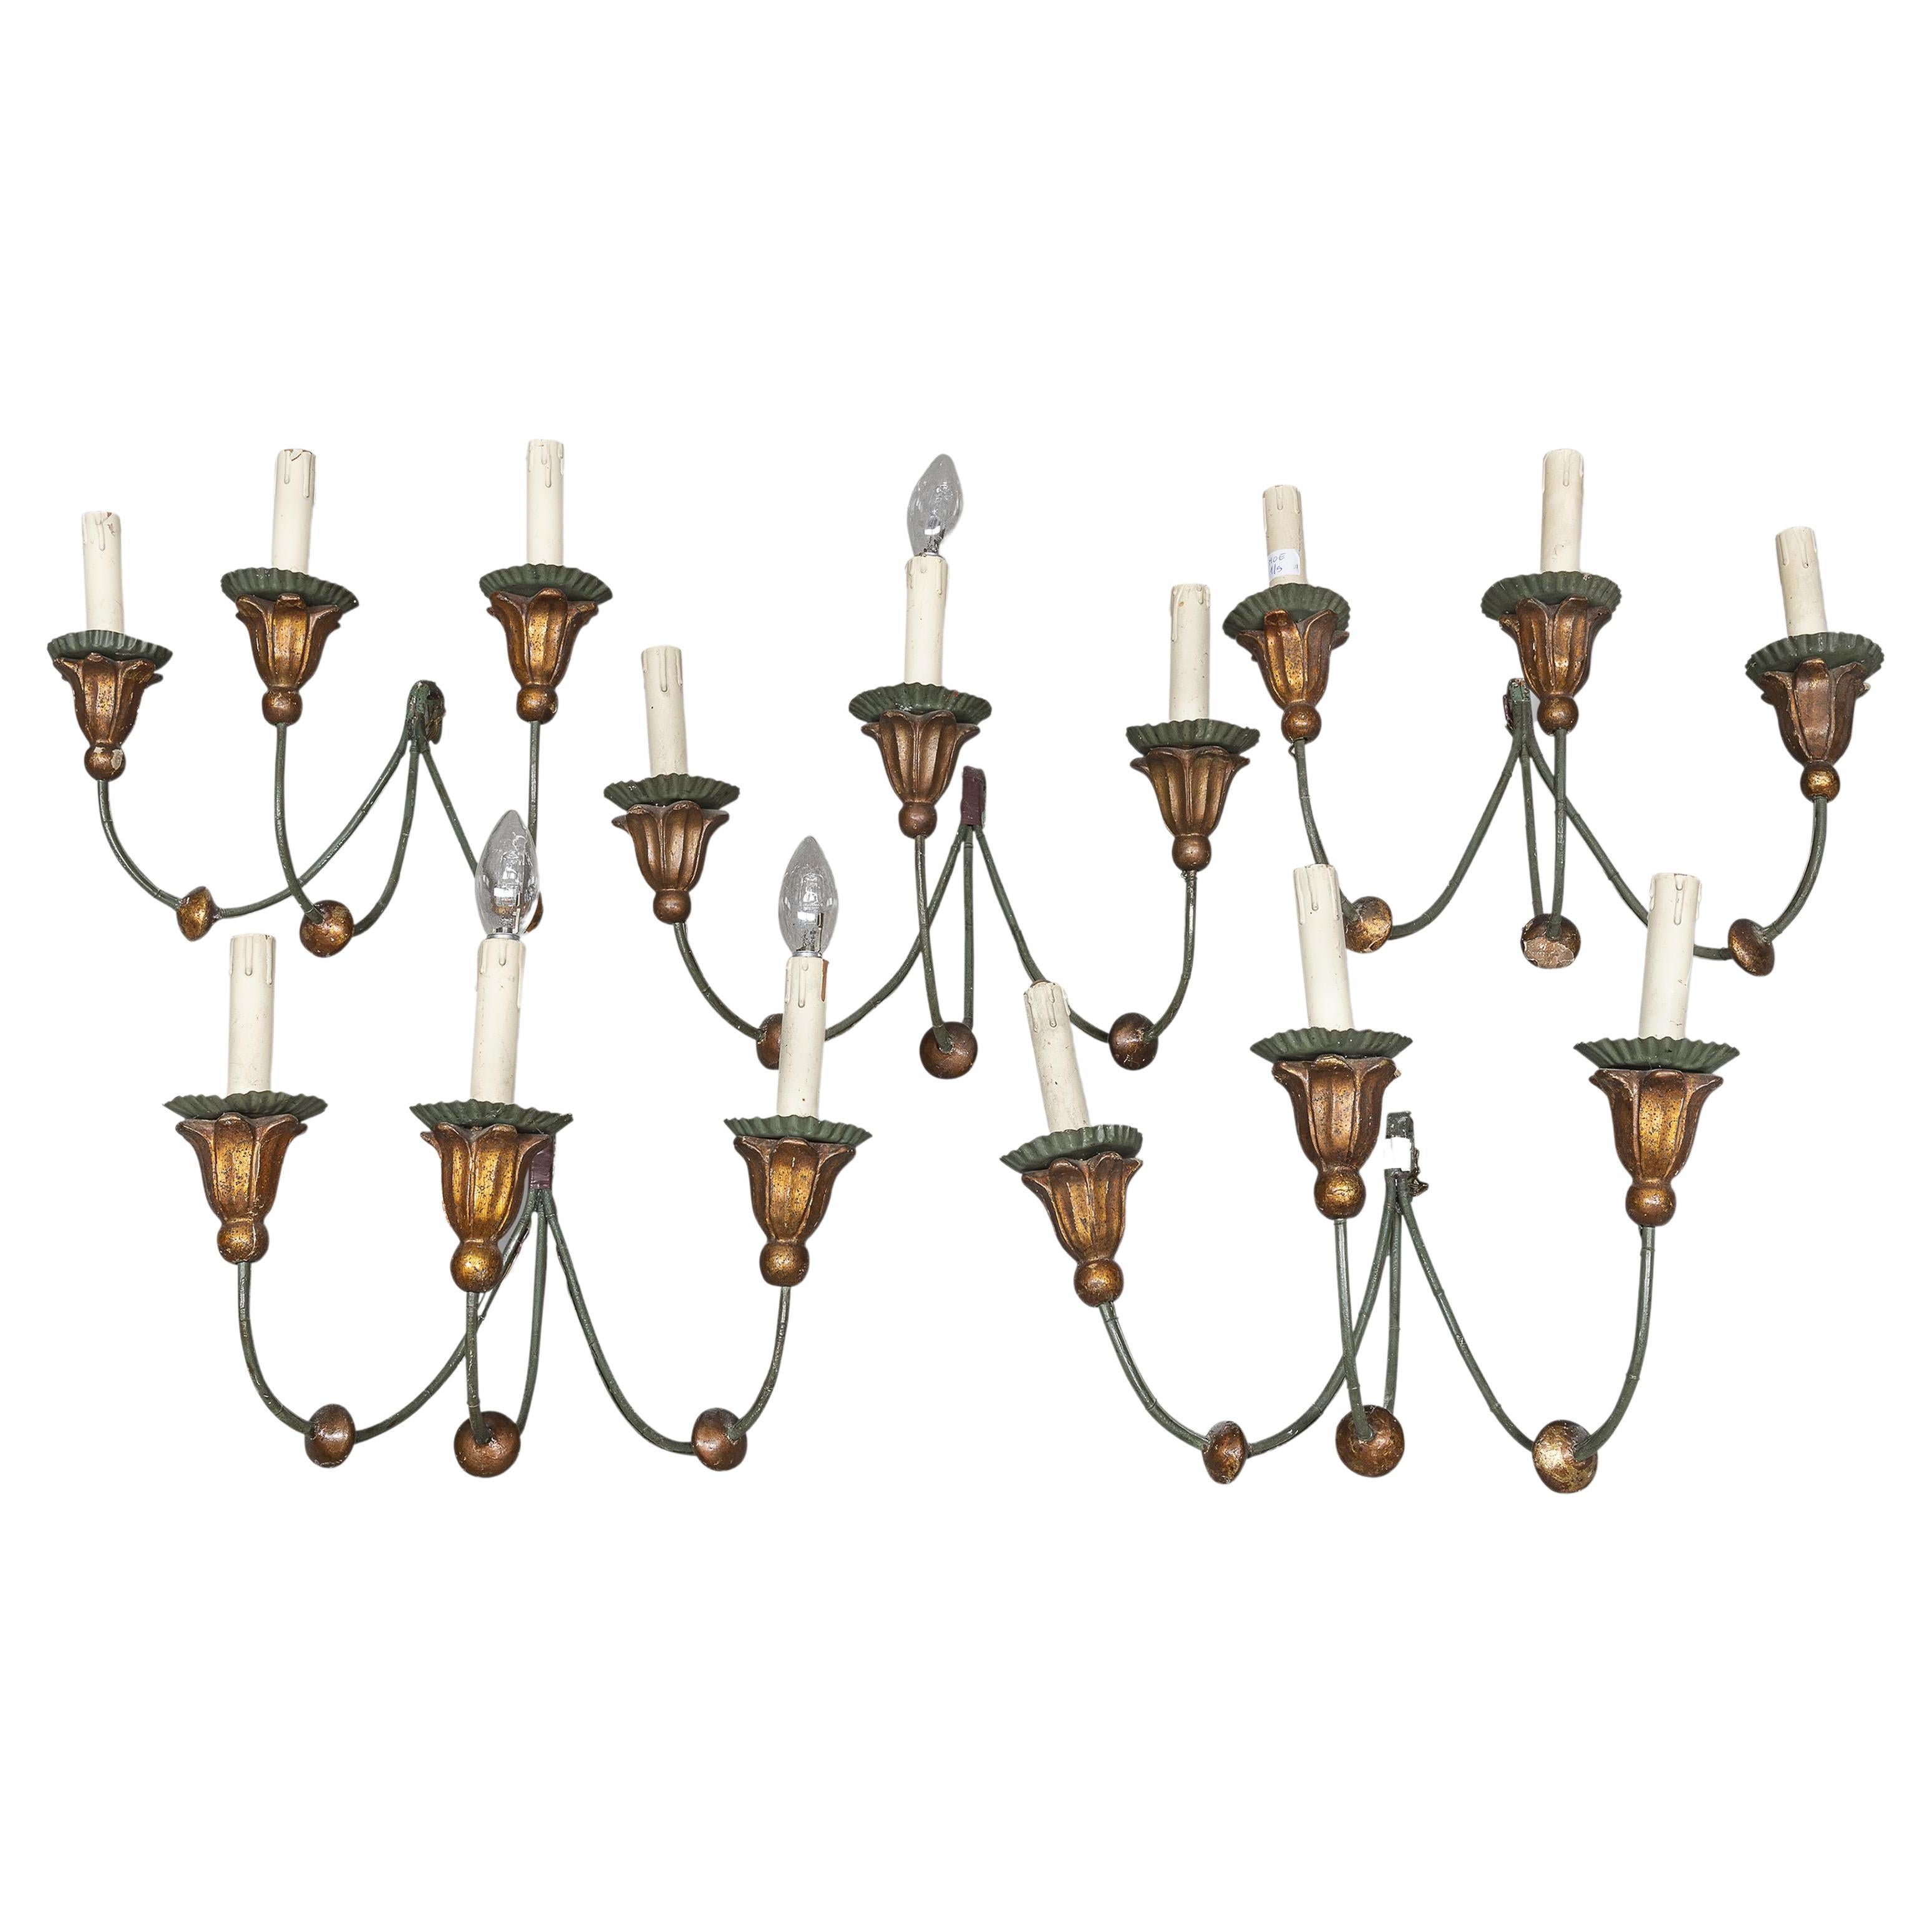 A Group of Five 19th century 3-light antique European Wall Sconces